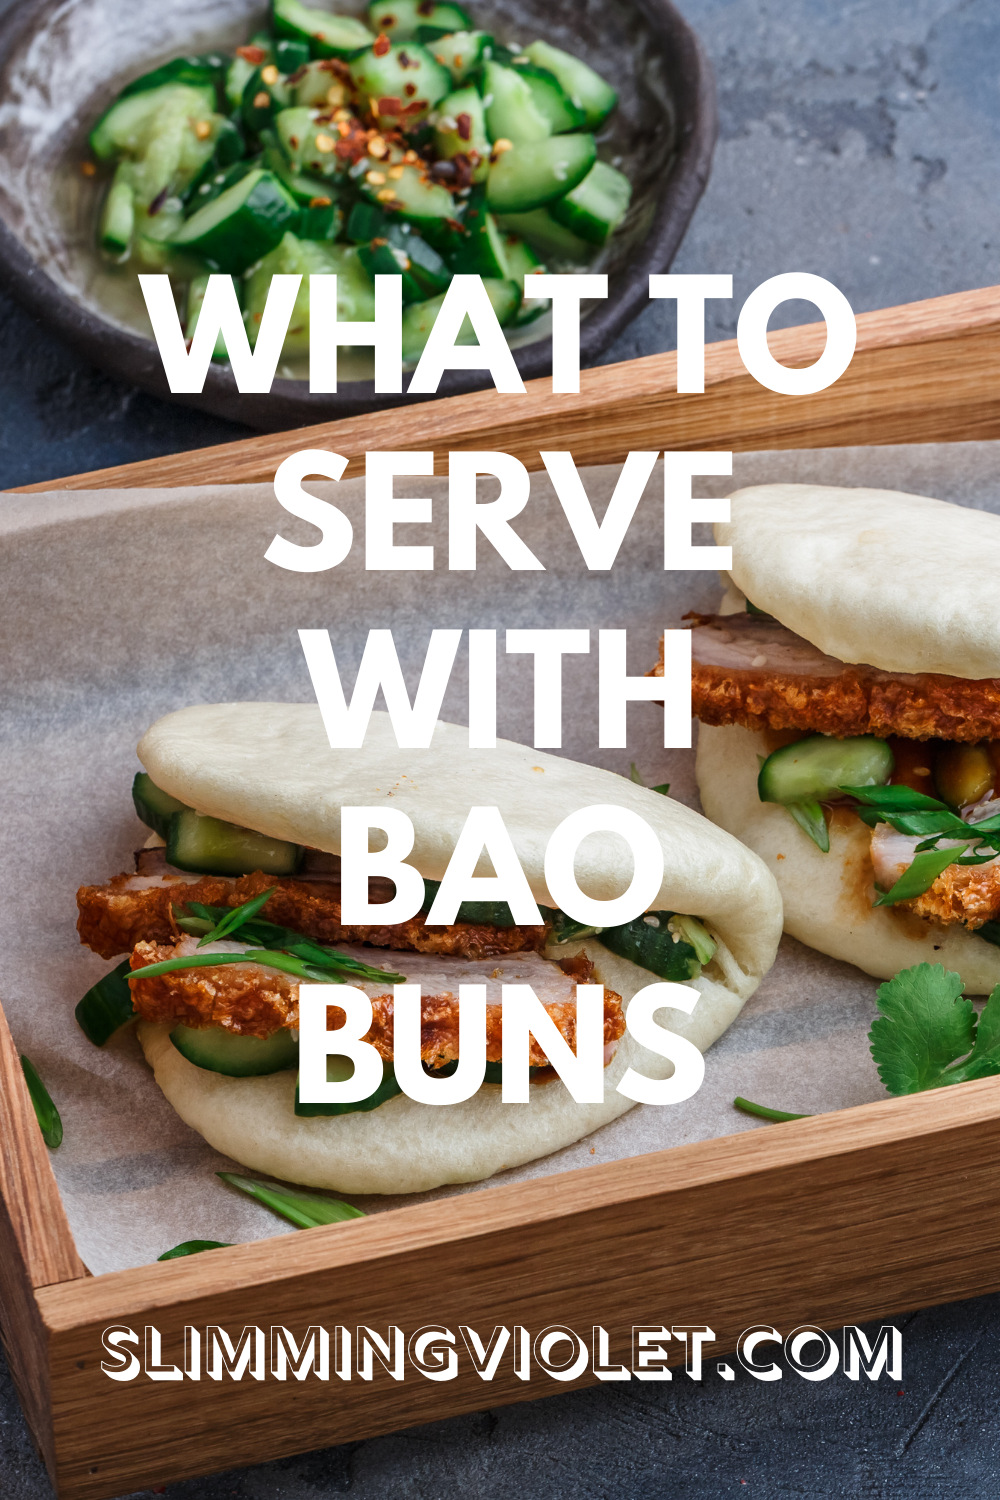 What to Serve With Bao Buns?